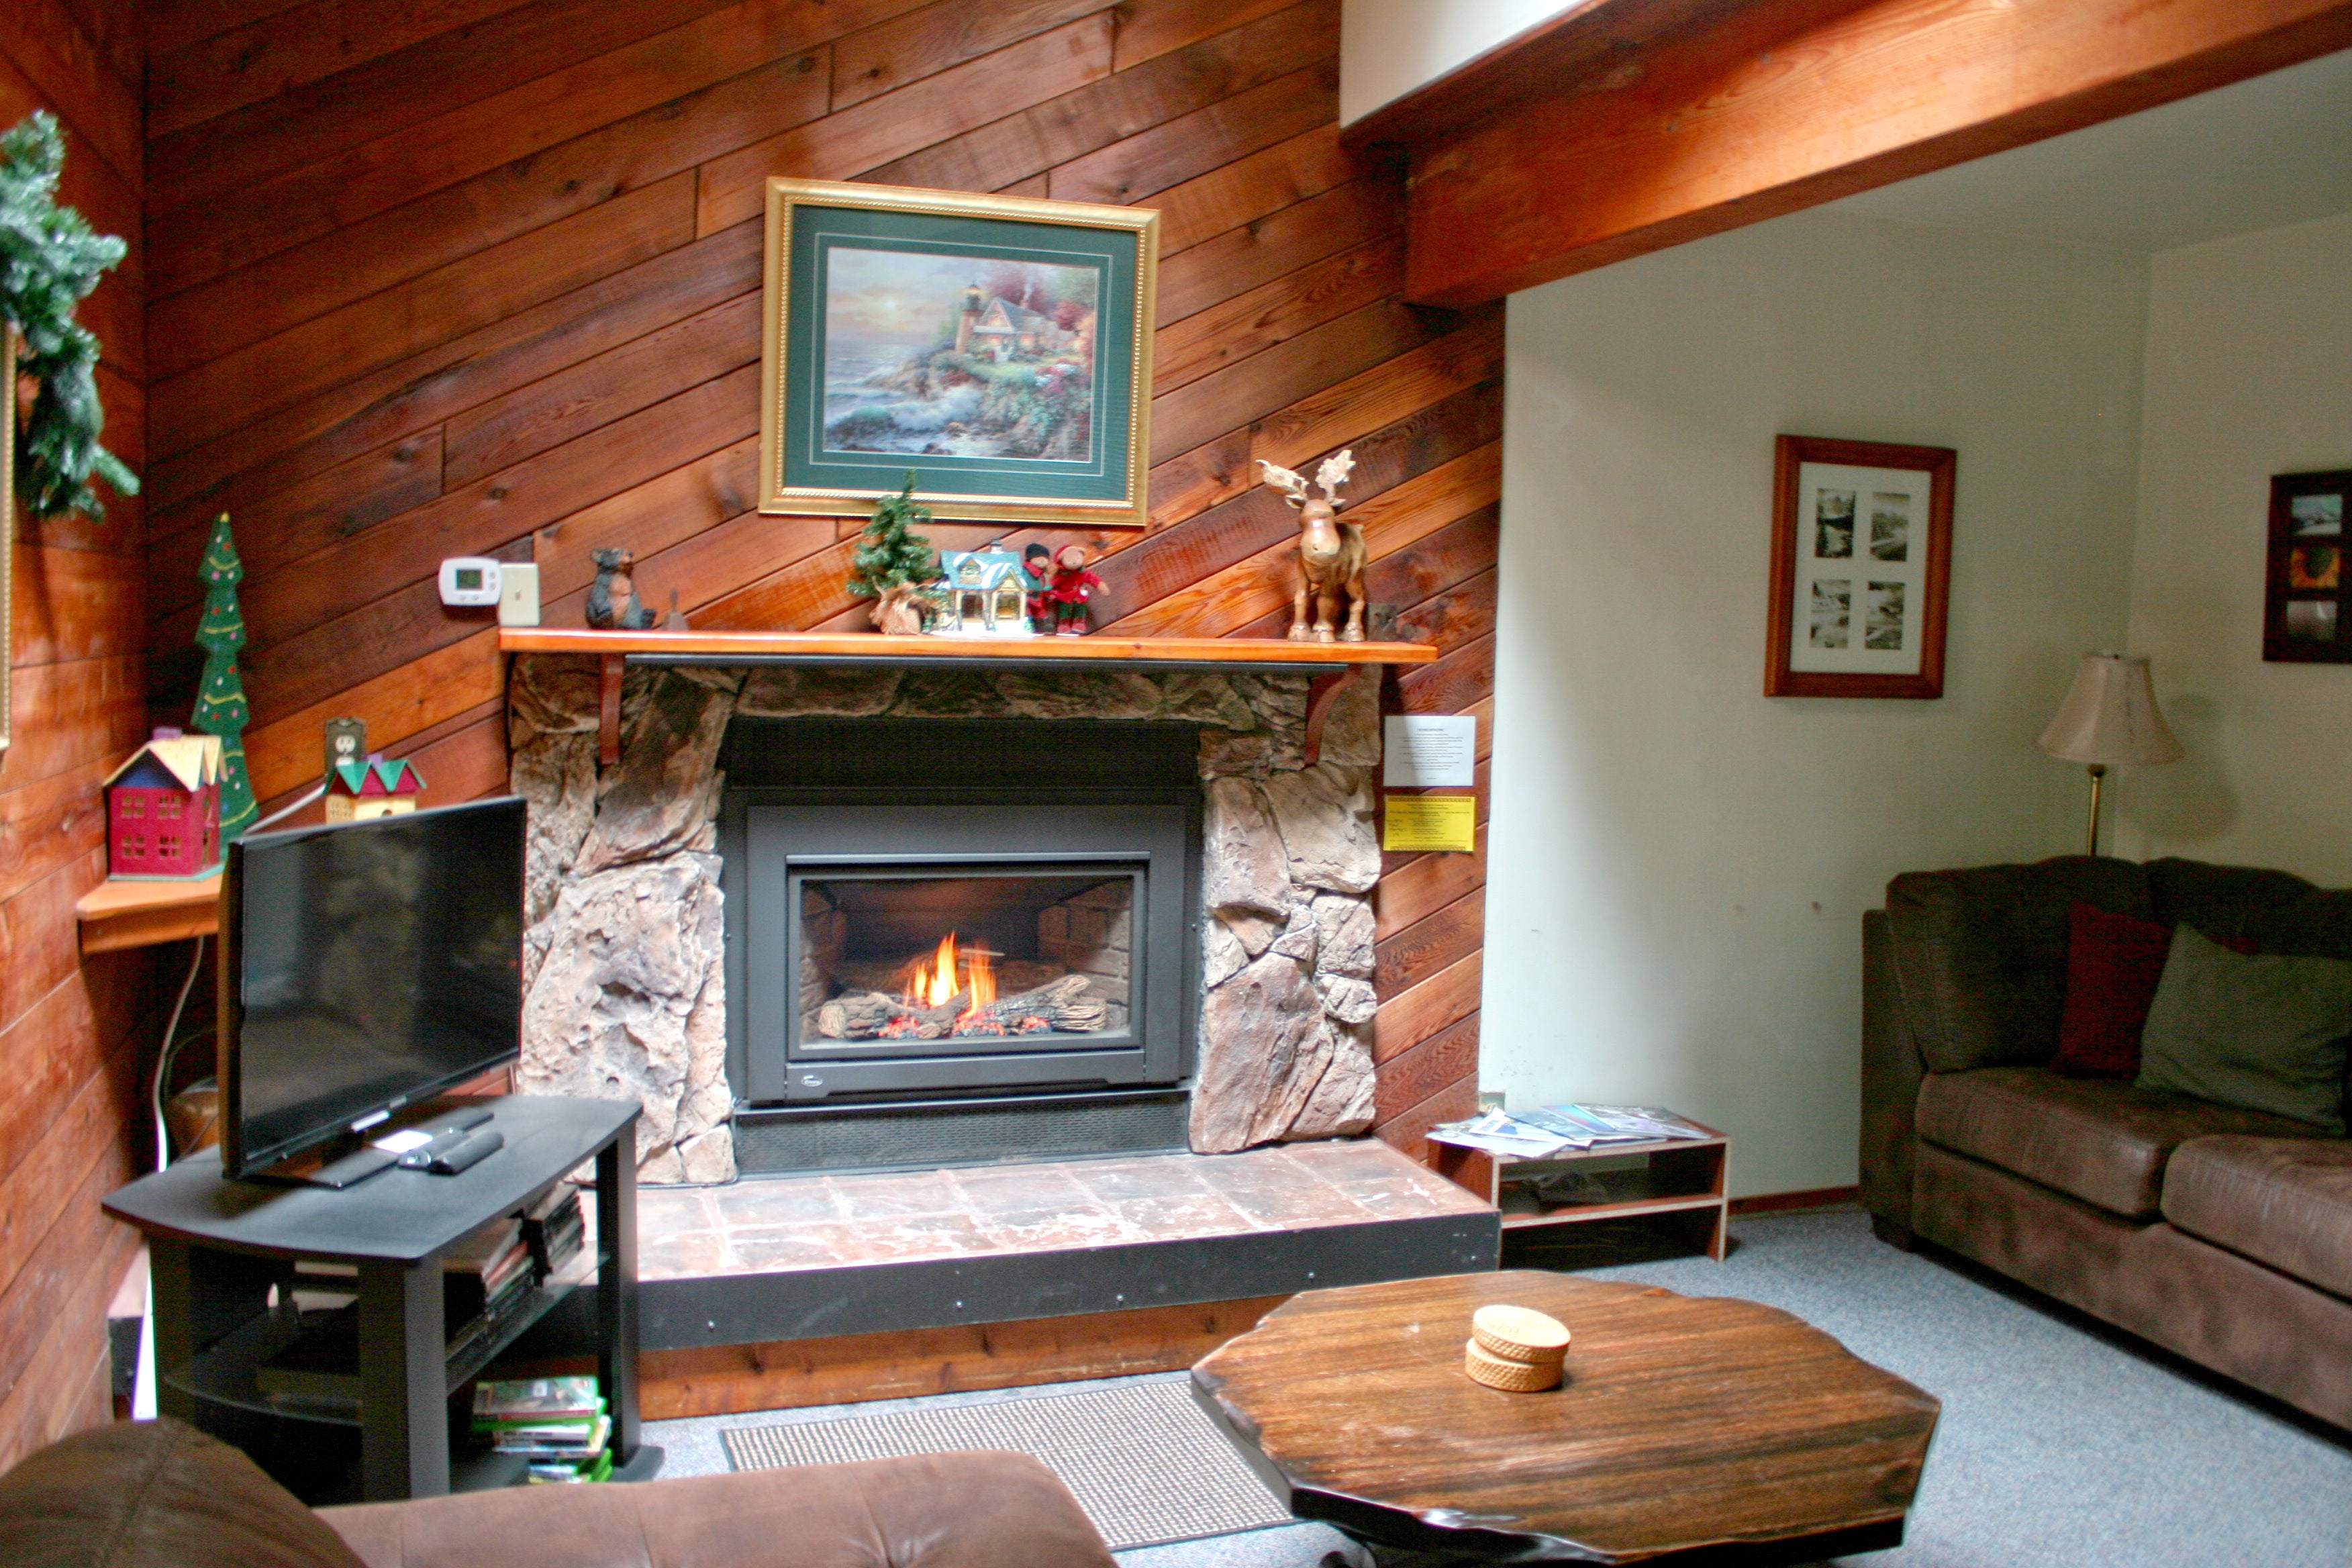 Camper submitted image from Mt. Baker Lodging - Cabin #26 - HOT TUB, FIREPLACE, W/D, D/W, BBQ, PETS OK, SLEEPS-8! - 1